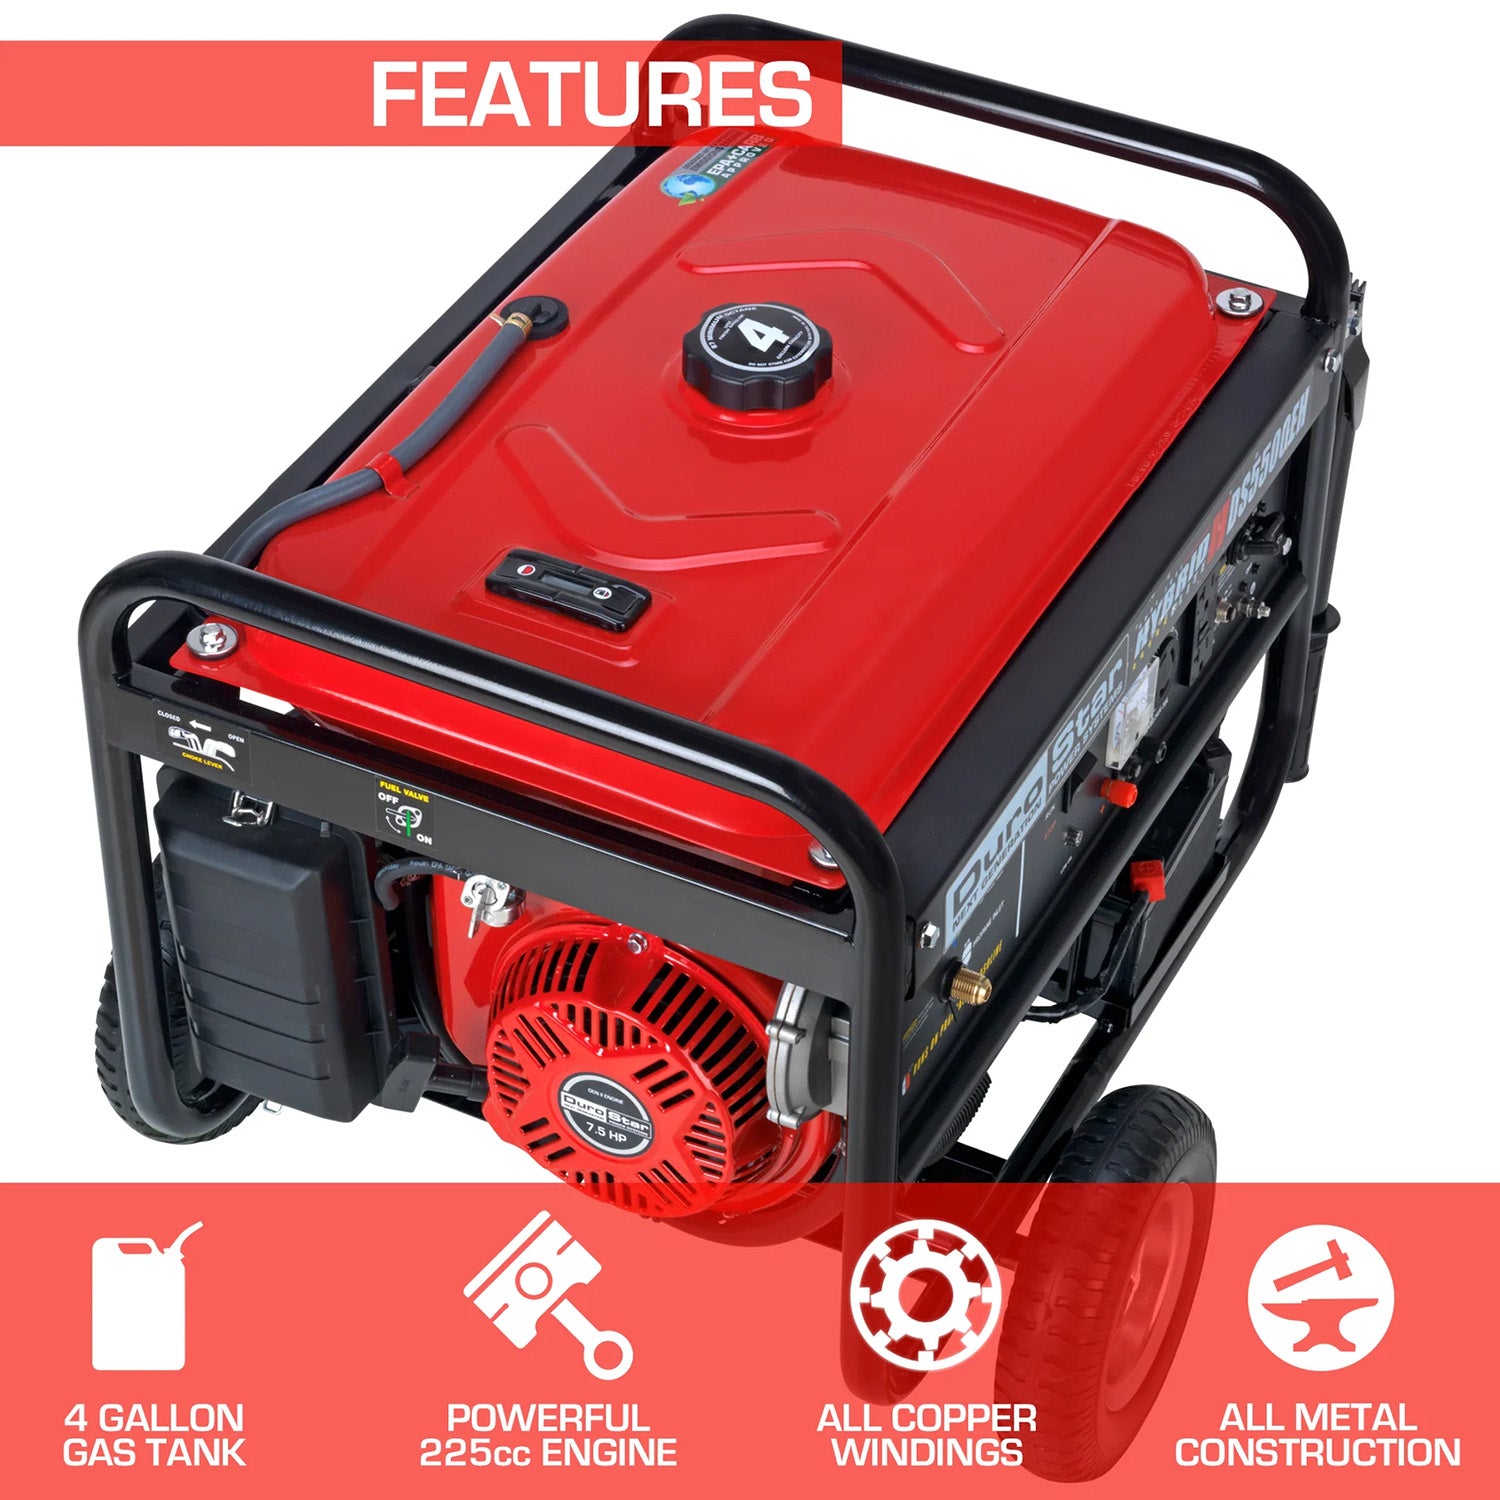 DuroStar DS5500EH Dual Fuel Portable Generator Features